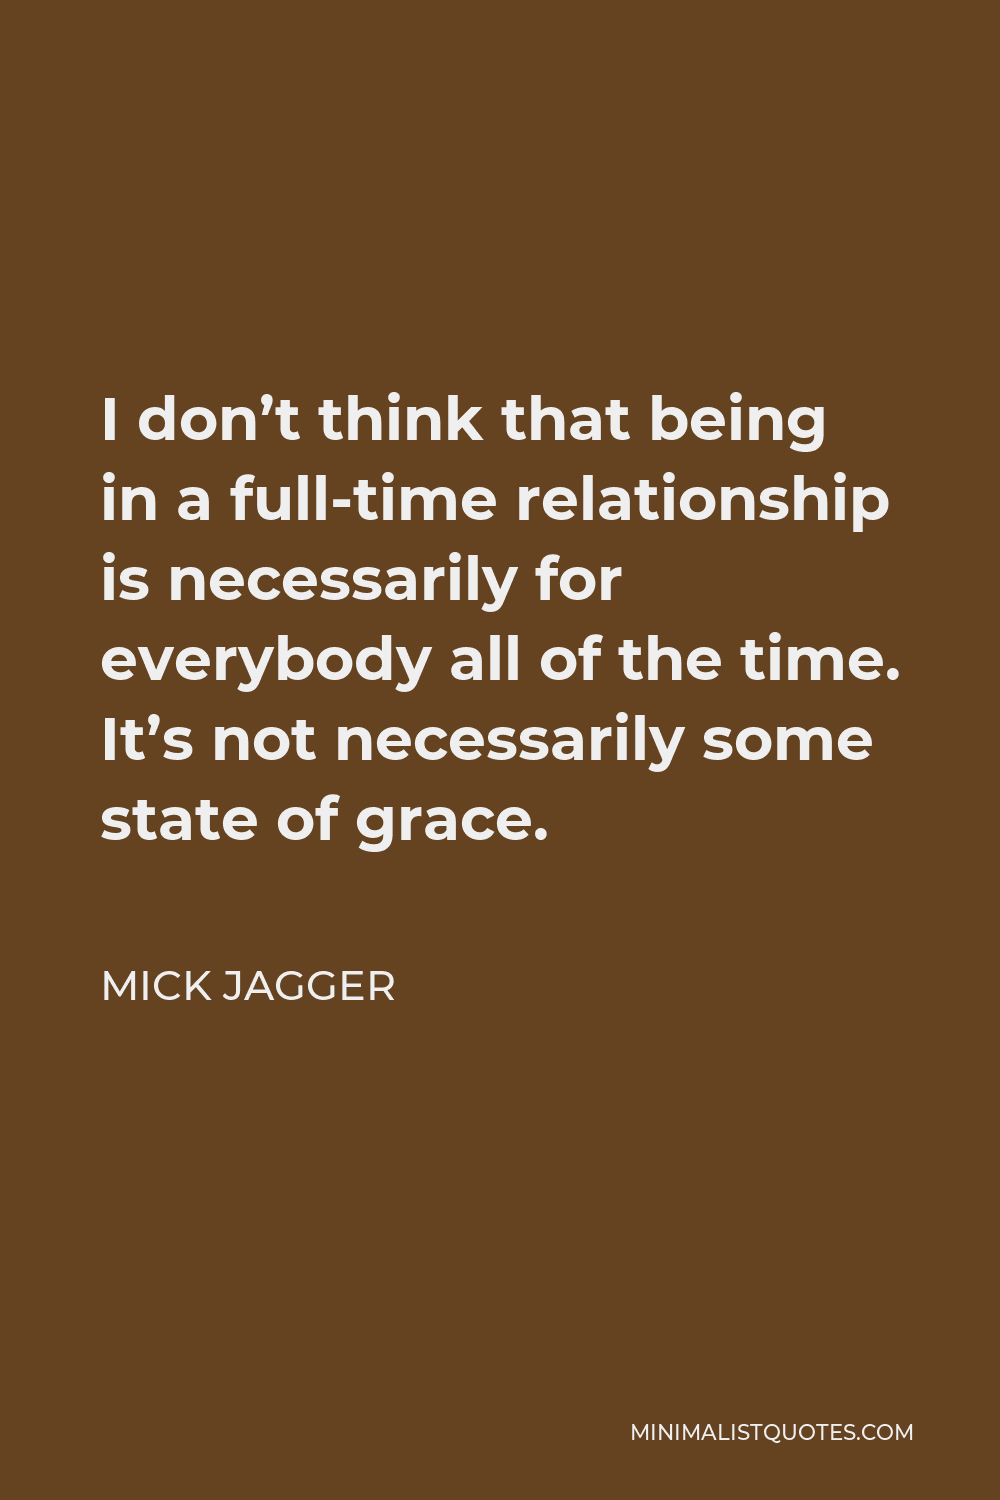 Mick Jagger Quote - I don’t think that being in a full-time relationship is necessarily for everybody all of the time. It’s not necessarily some state of grace.